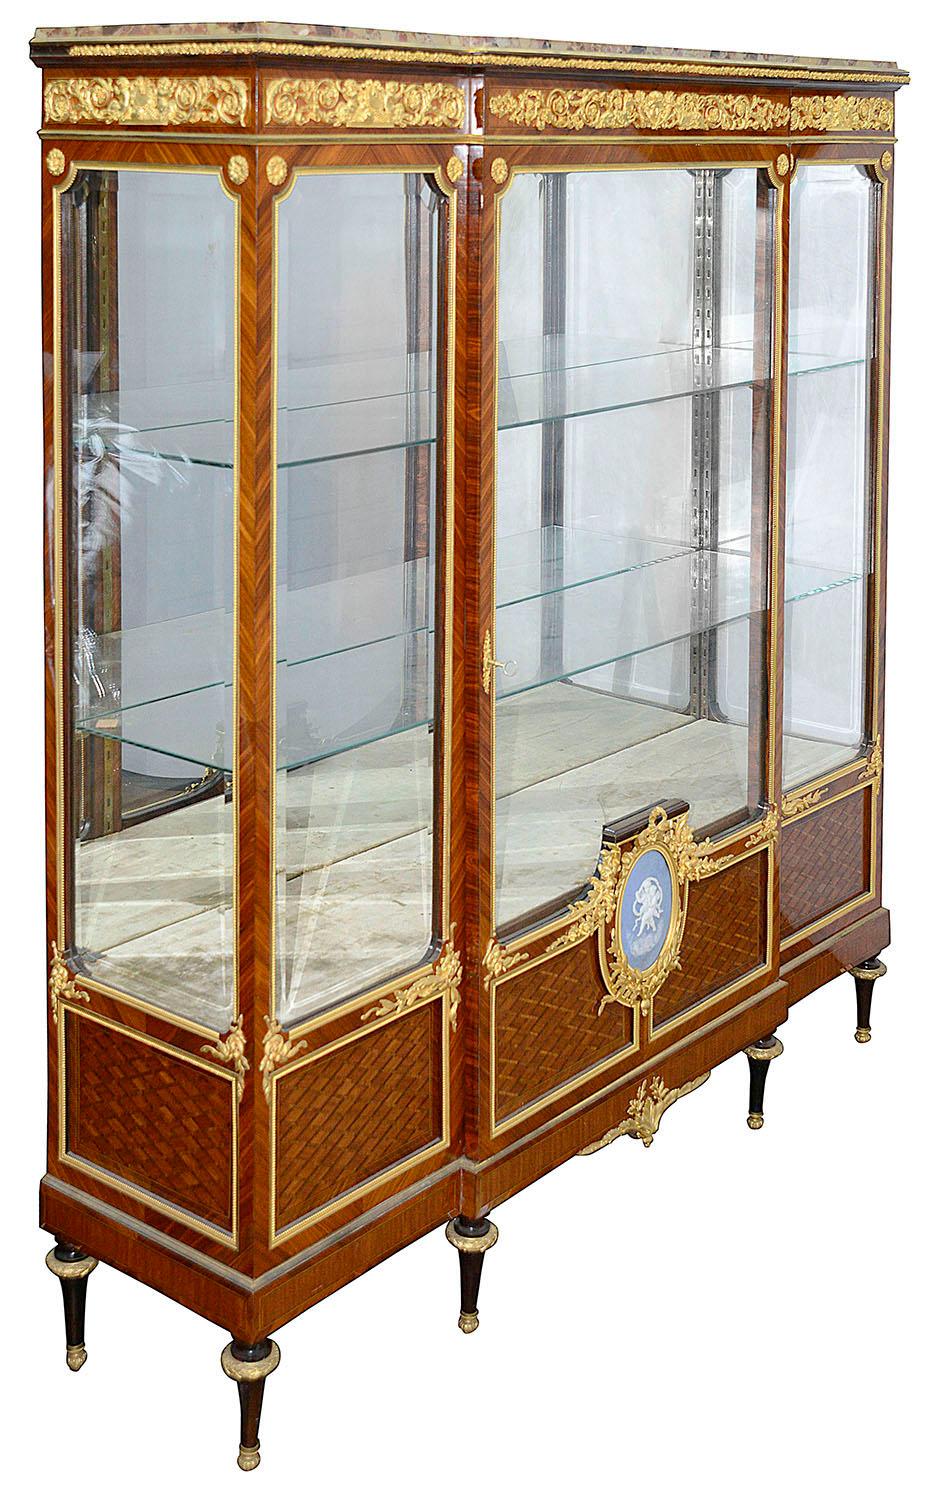 A very good quality late 19th century French break fronted marble topped Vitrine. Having wonderful classical gilded ormolu mounts and plaques with scrollingq C scrolls, foliage, Rams and putti blowing horns. Parquetry inlay to the door fronts and